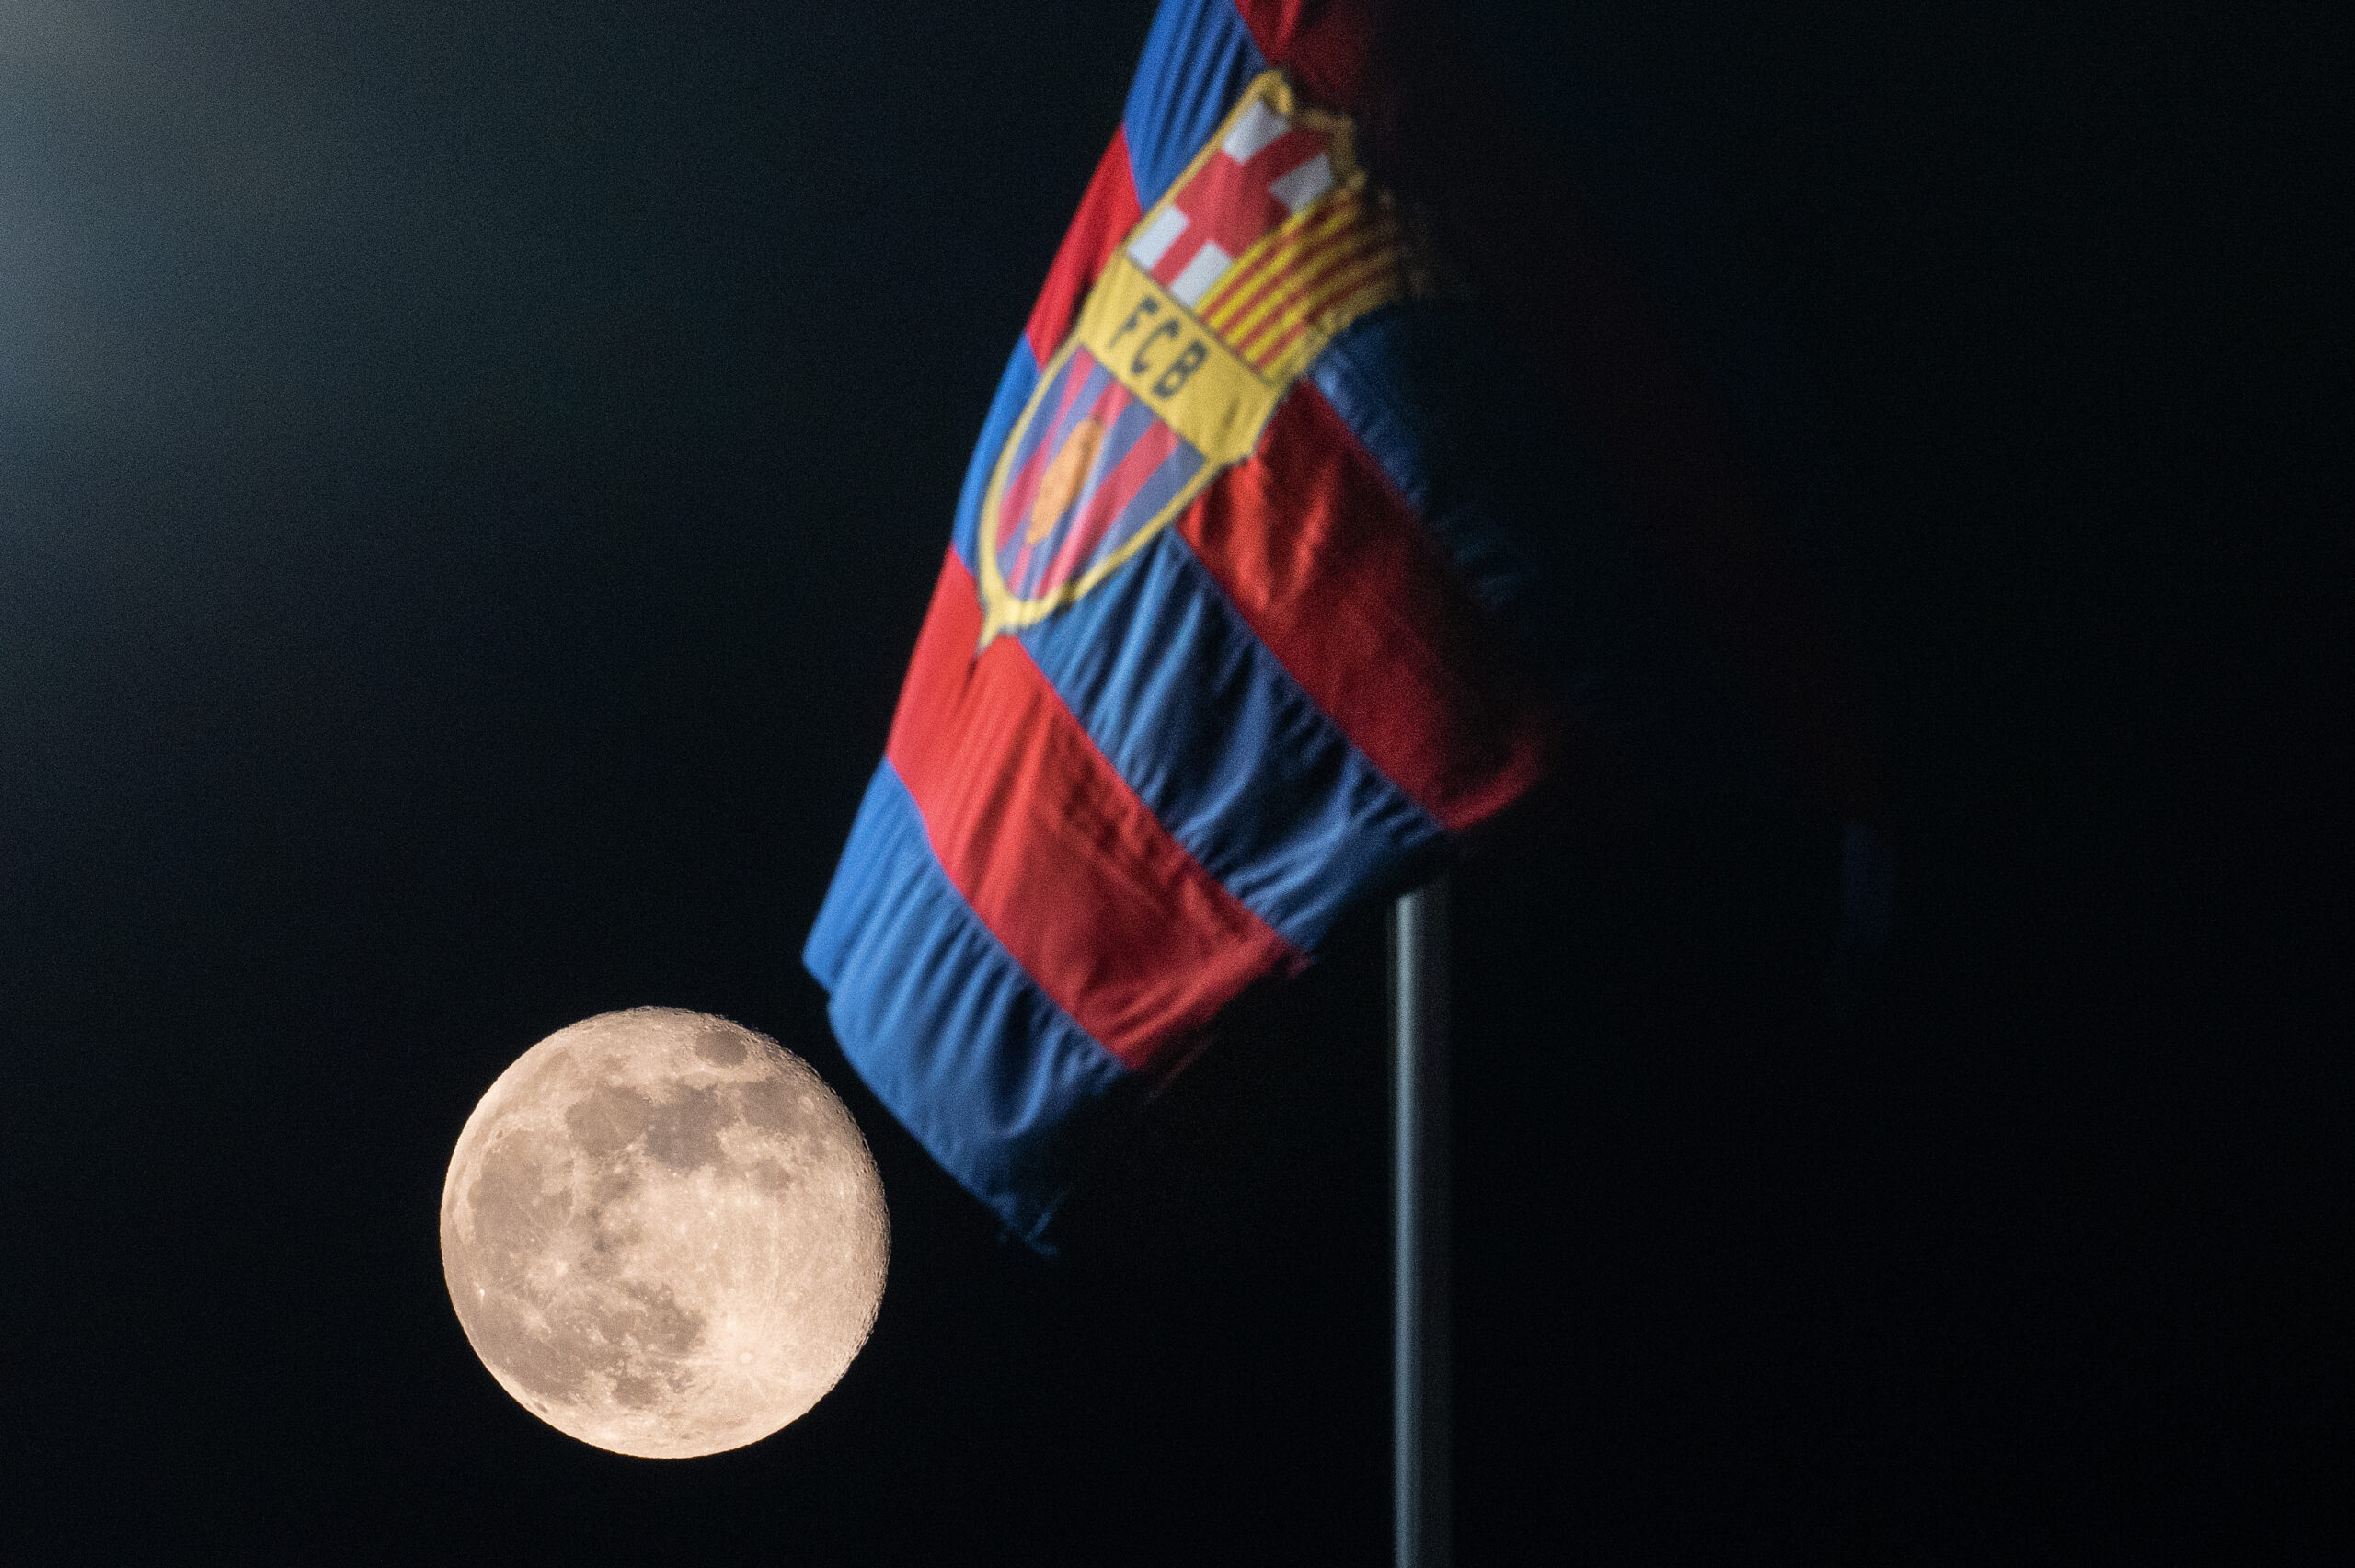 BARCELONA, SPAIN - NOVEMBER 28: A view of the moon alongside an FC Barcelona flag ahead of the UEFA Champions League match between FC Barcelona and FC Porto at Estadi Olimpic Lluis Companys on November 28, 2023 in Barcelona, Spain.